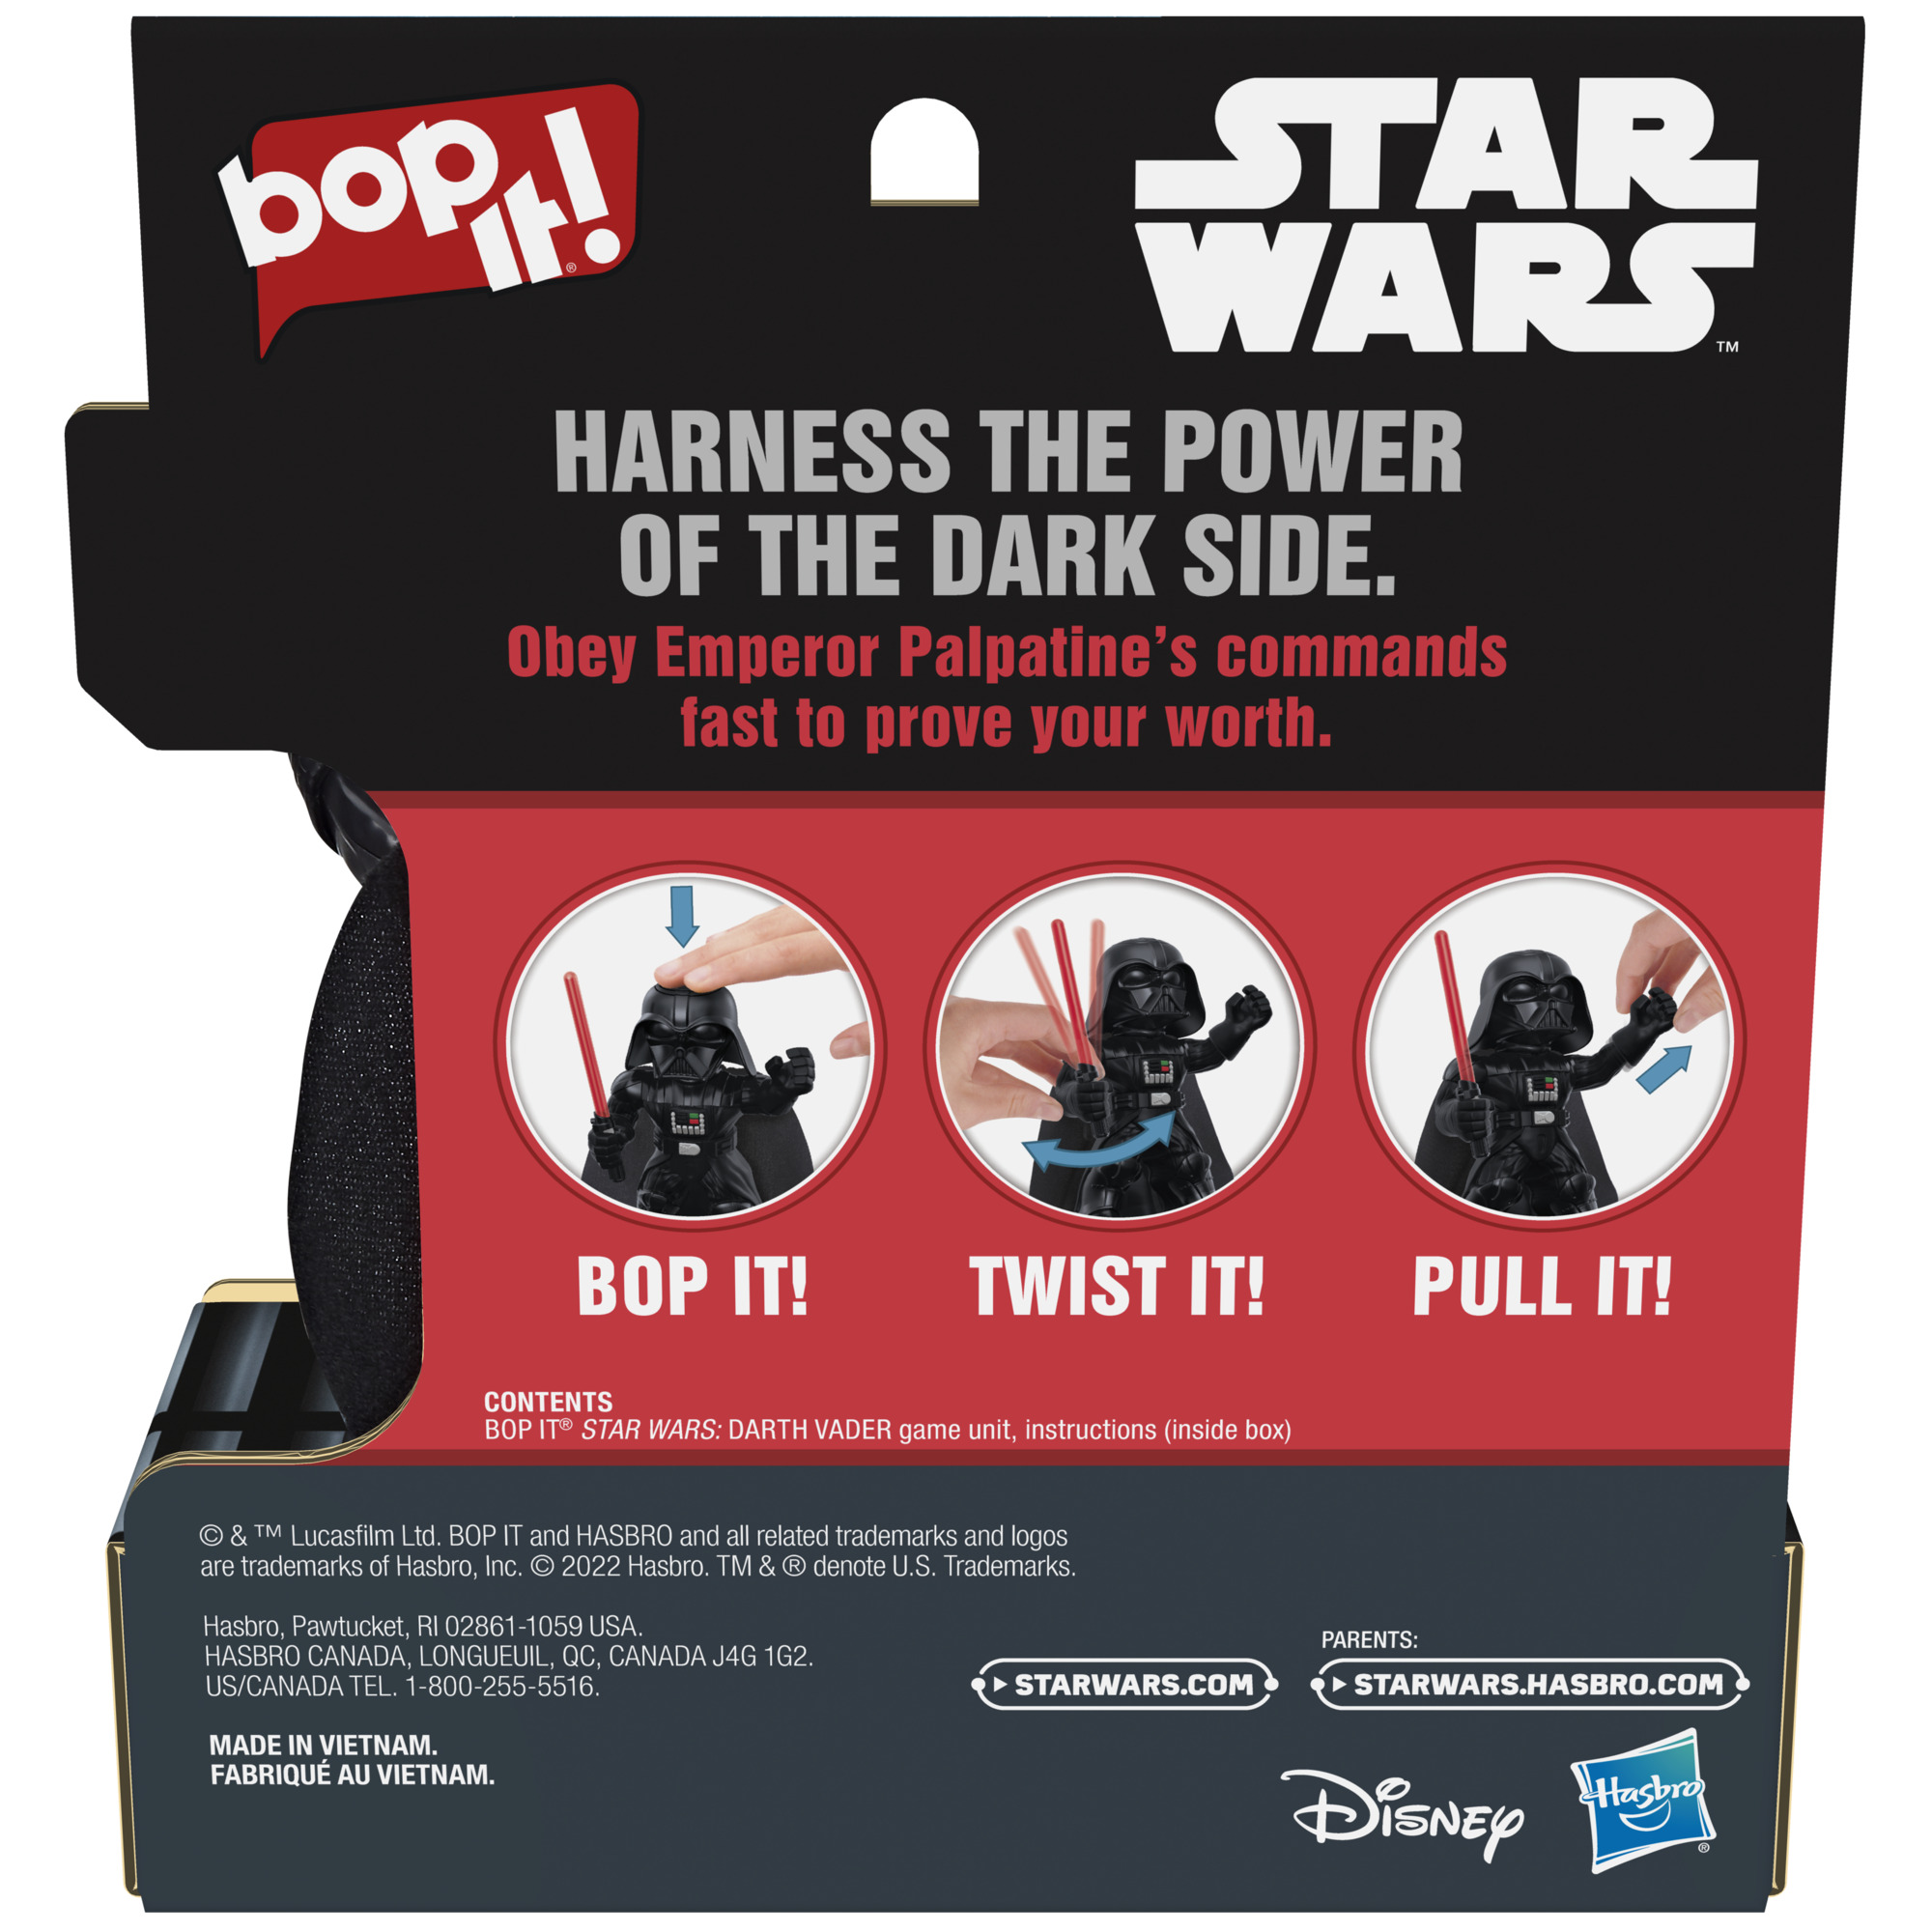 Bop It! Star Wars Darth Vader Edition Game, Features the Voice of Emperor Palpatine, Ages 8 and Up, Only At Walmart - image 5 of 5